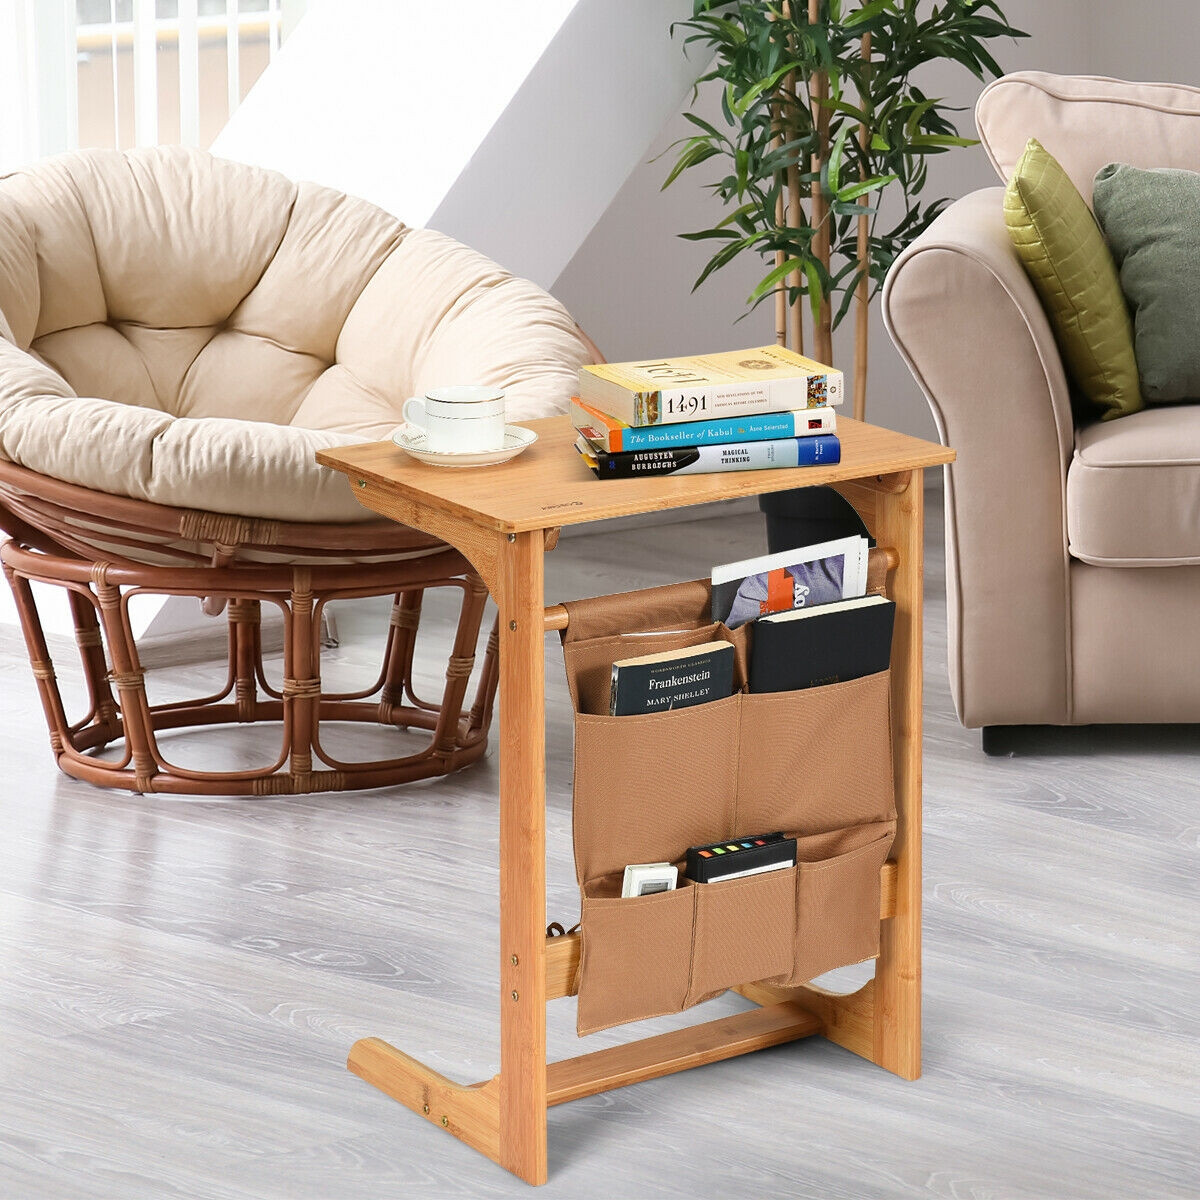 Bamboo Sofa Table End Table Bedside Table With Storage Bag